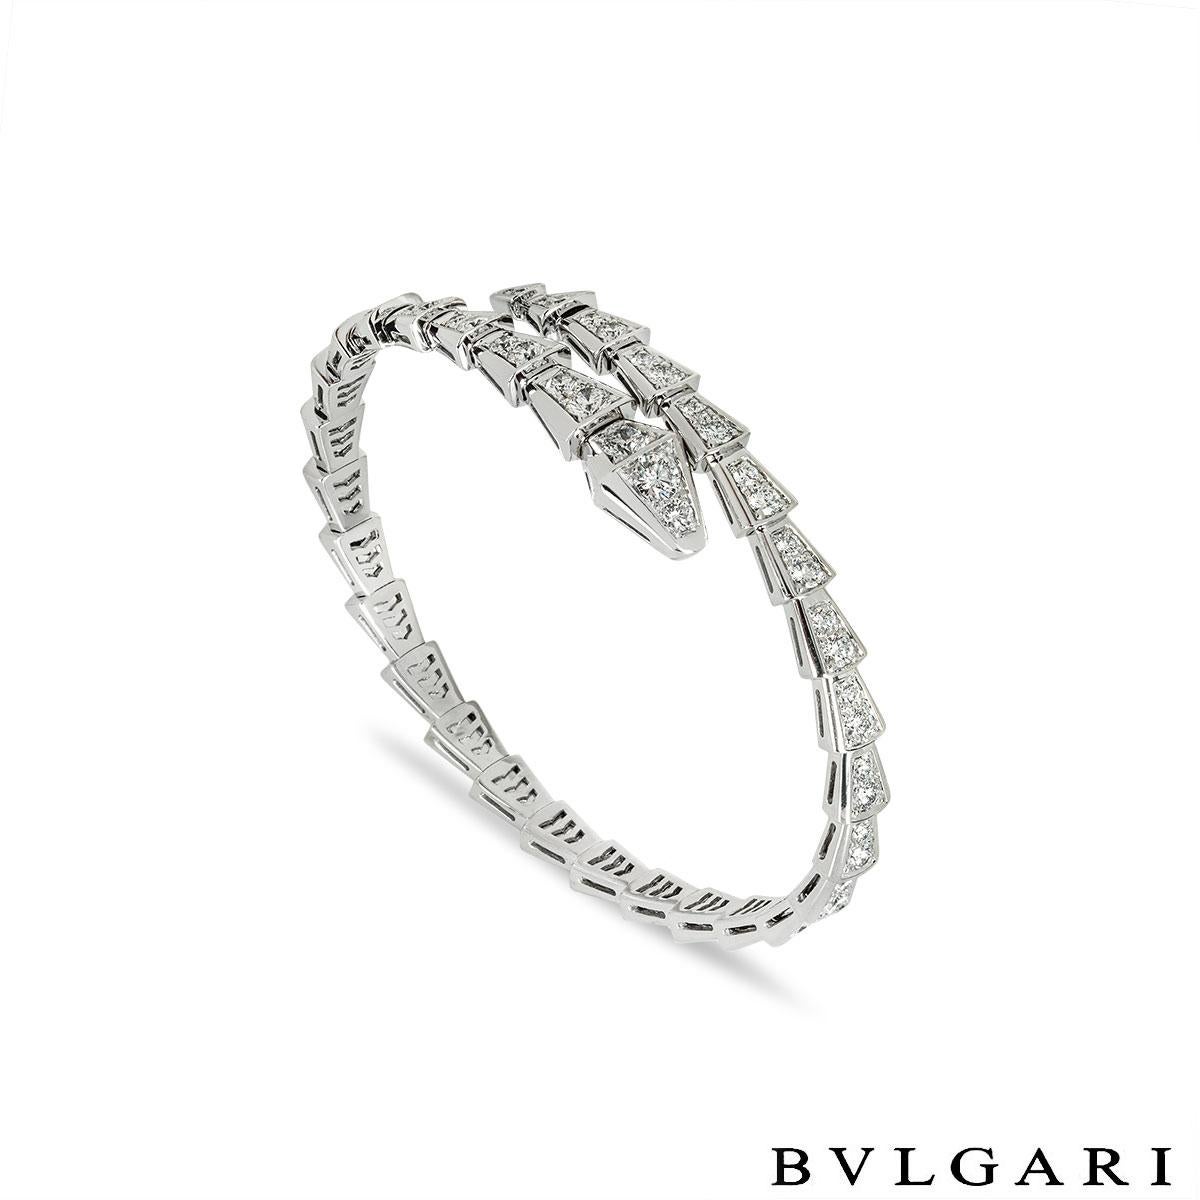 A sophisticated 18k white gold diamond bracelet by Bvlgari from the Serpenti collection. The bracelet is in the form of a serpent that coils around the wrist with 33 diamond set sections. The 68 round brilliant cut diamonds have an approximate total